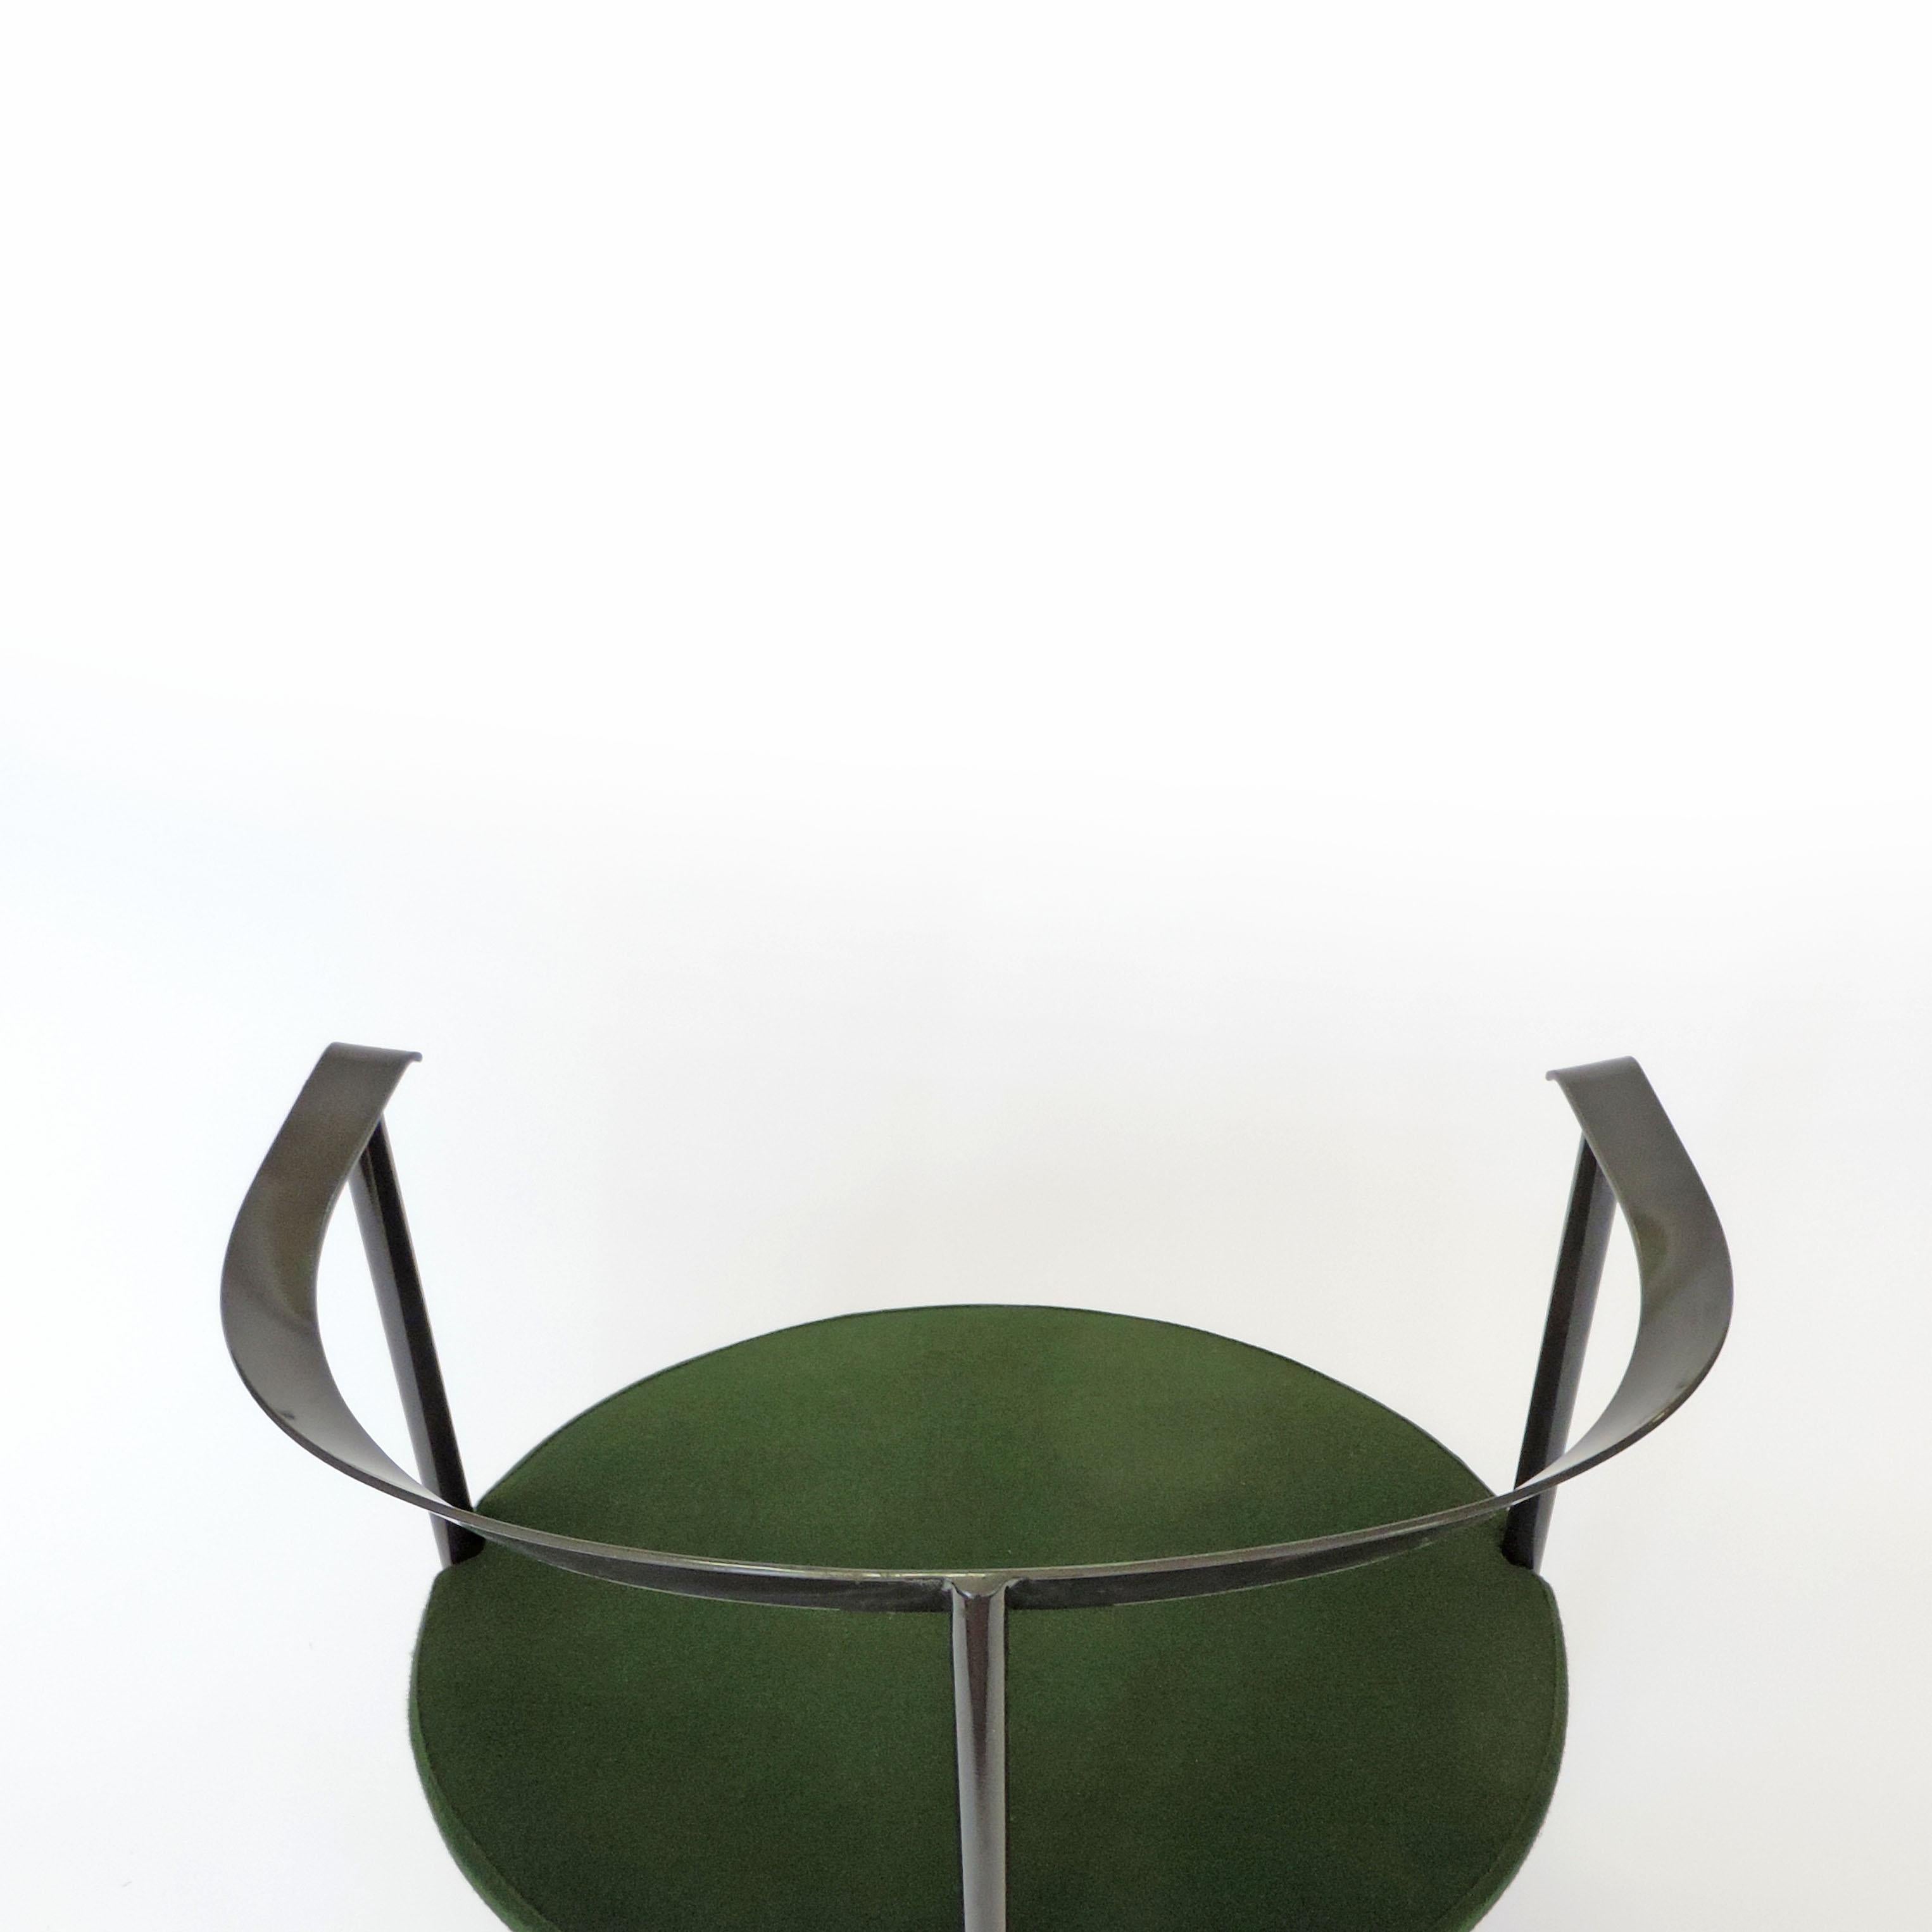 Luigi Caccia Dominioni Catilina chair for Azucena, Italy, 1958
This model probably 1970s-1980s
Seat covered in green felt.